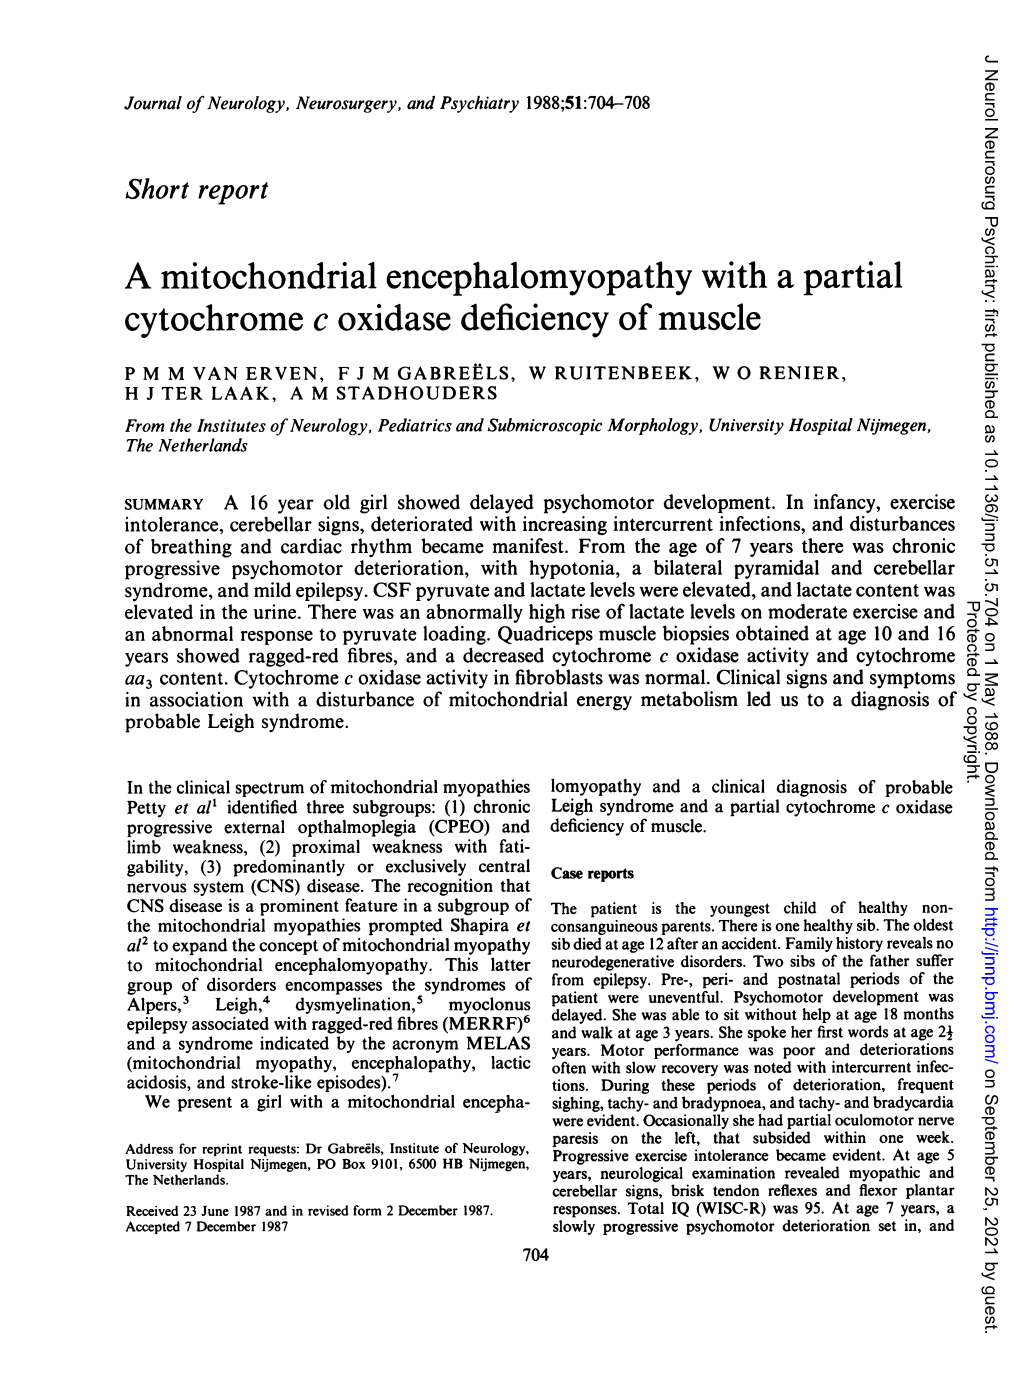 A Mitochondrial Encephalomyopathy with a Partial Cytochrome C Oxidase Deficiency of Muscle